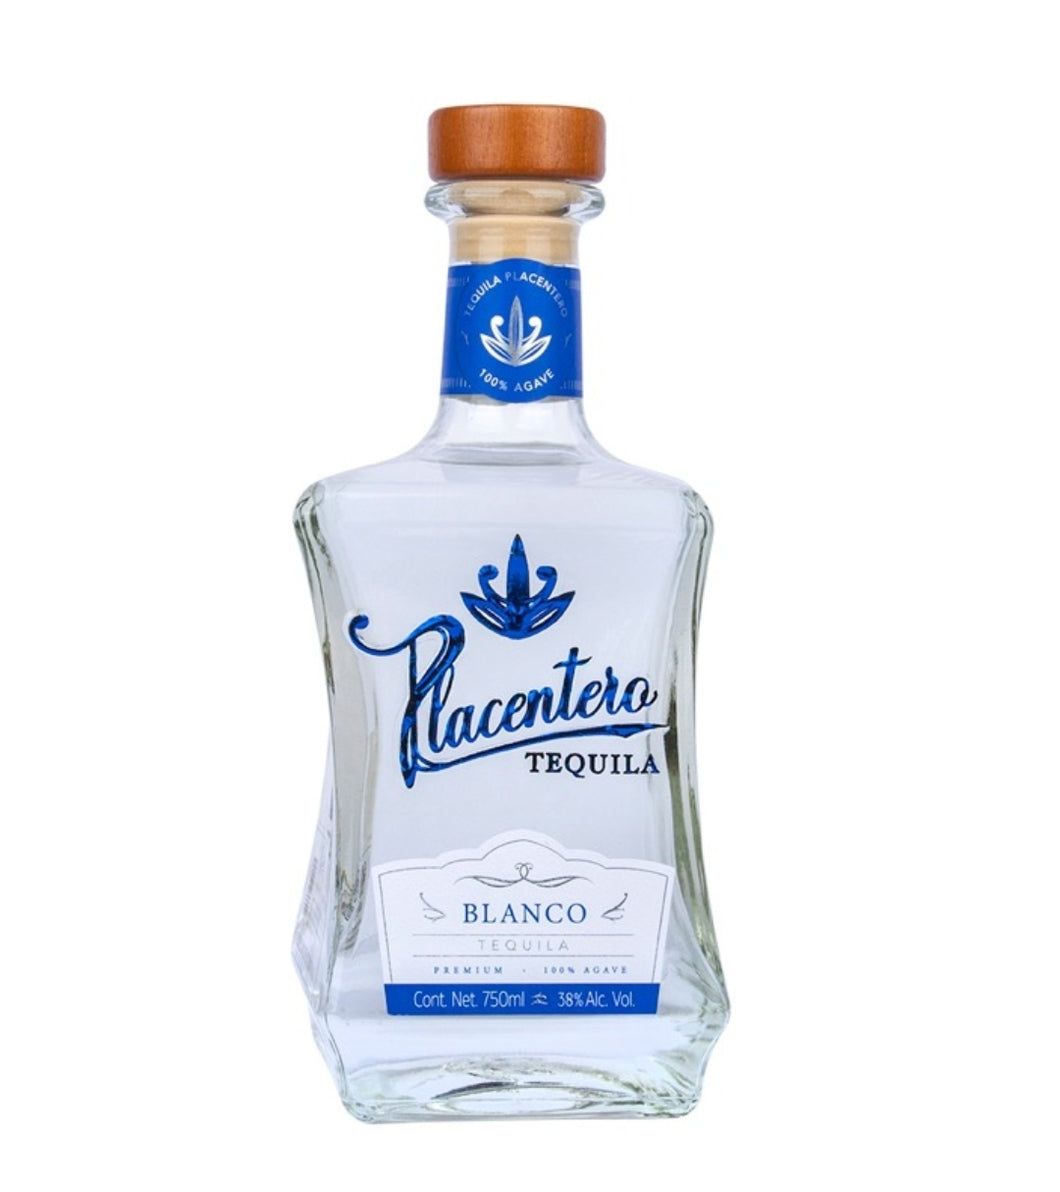 Tequila PLACENTERO Blanco 100% Agave - 750ml